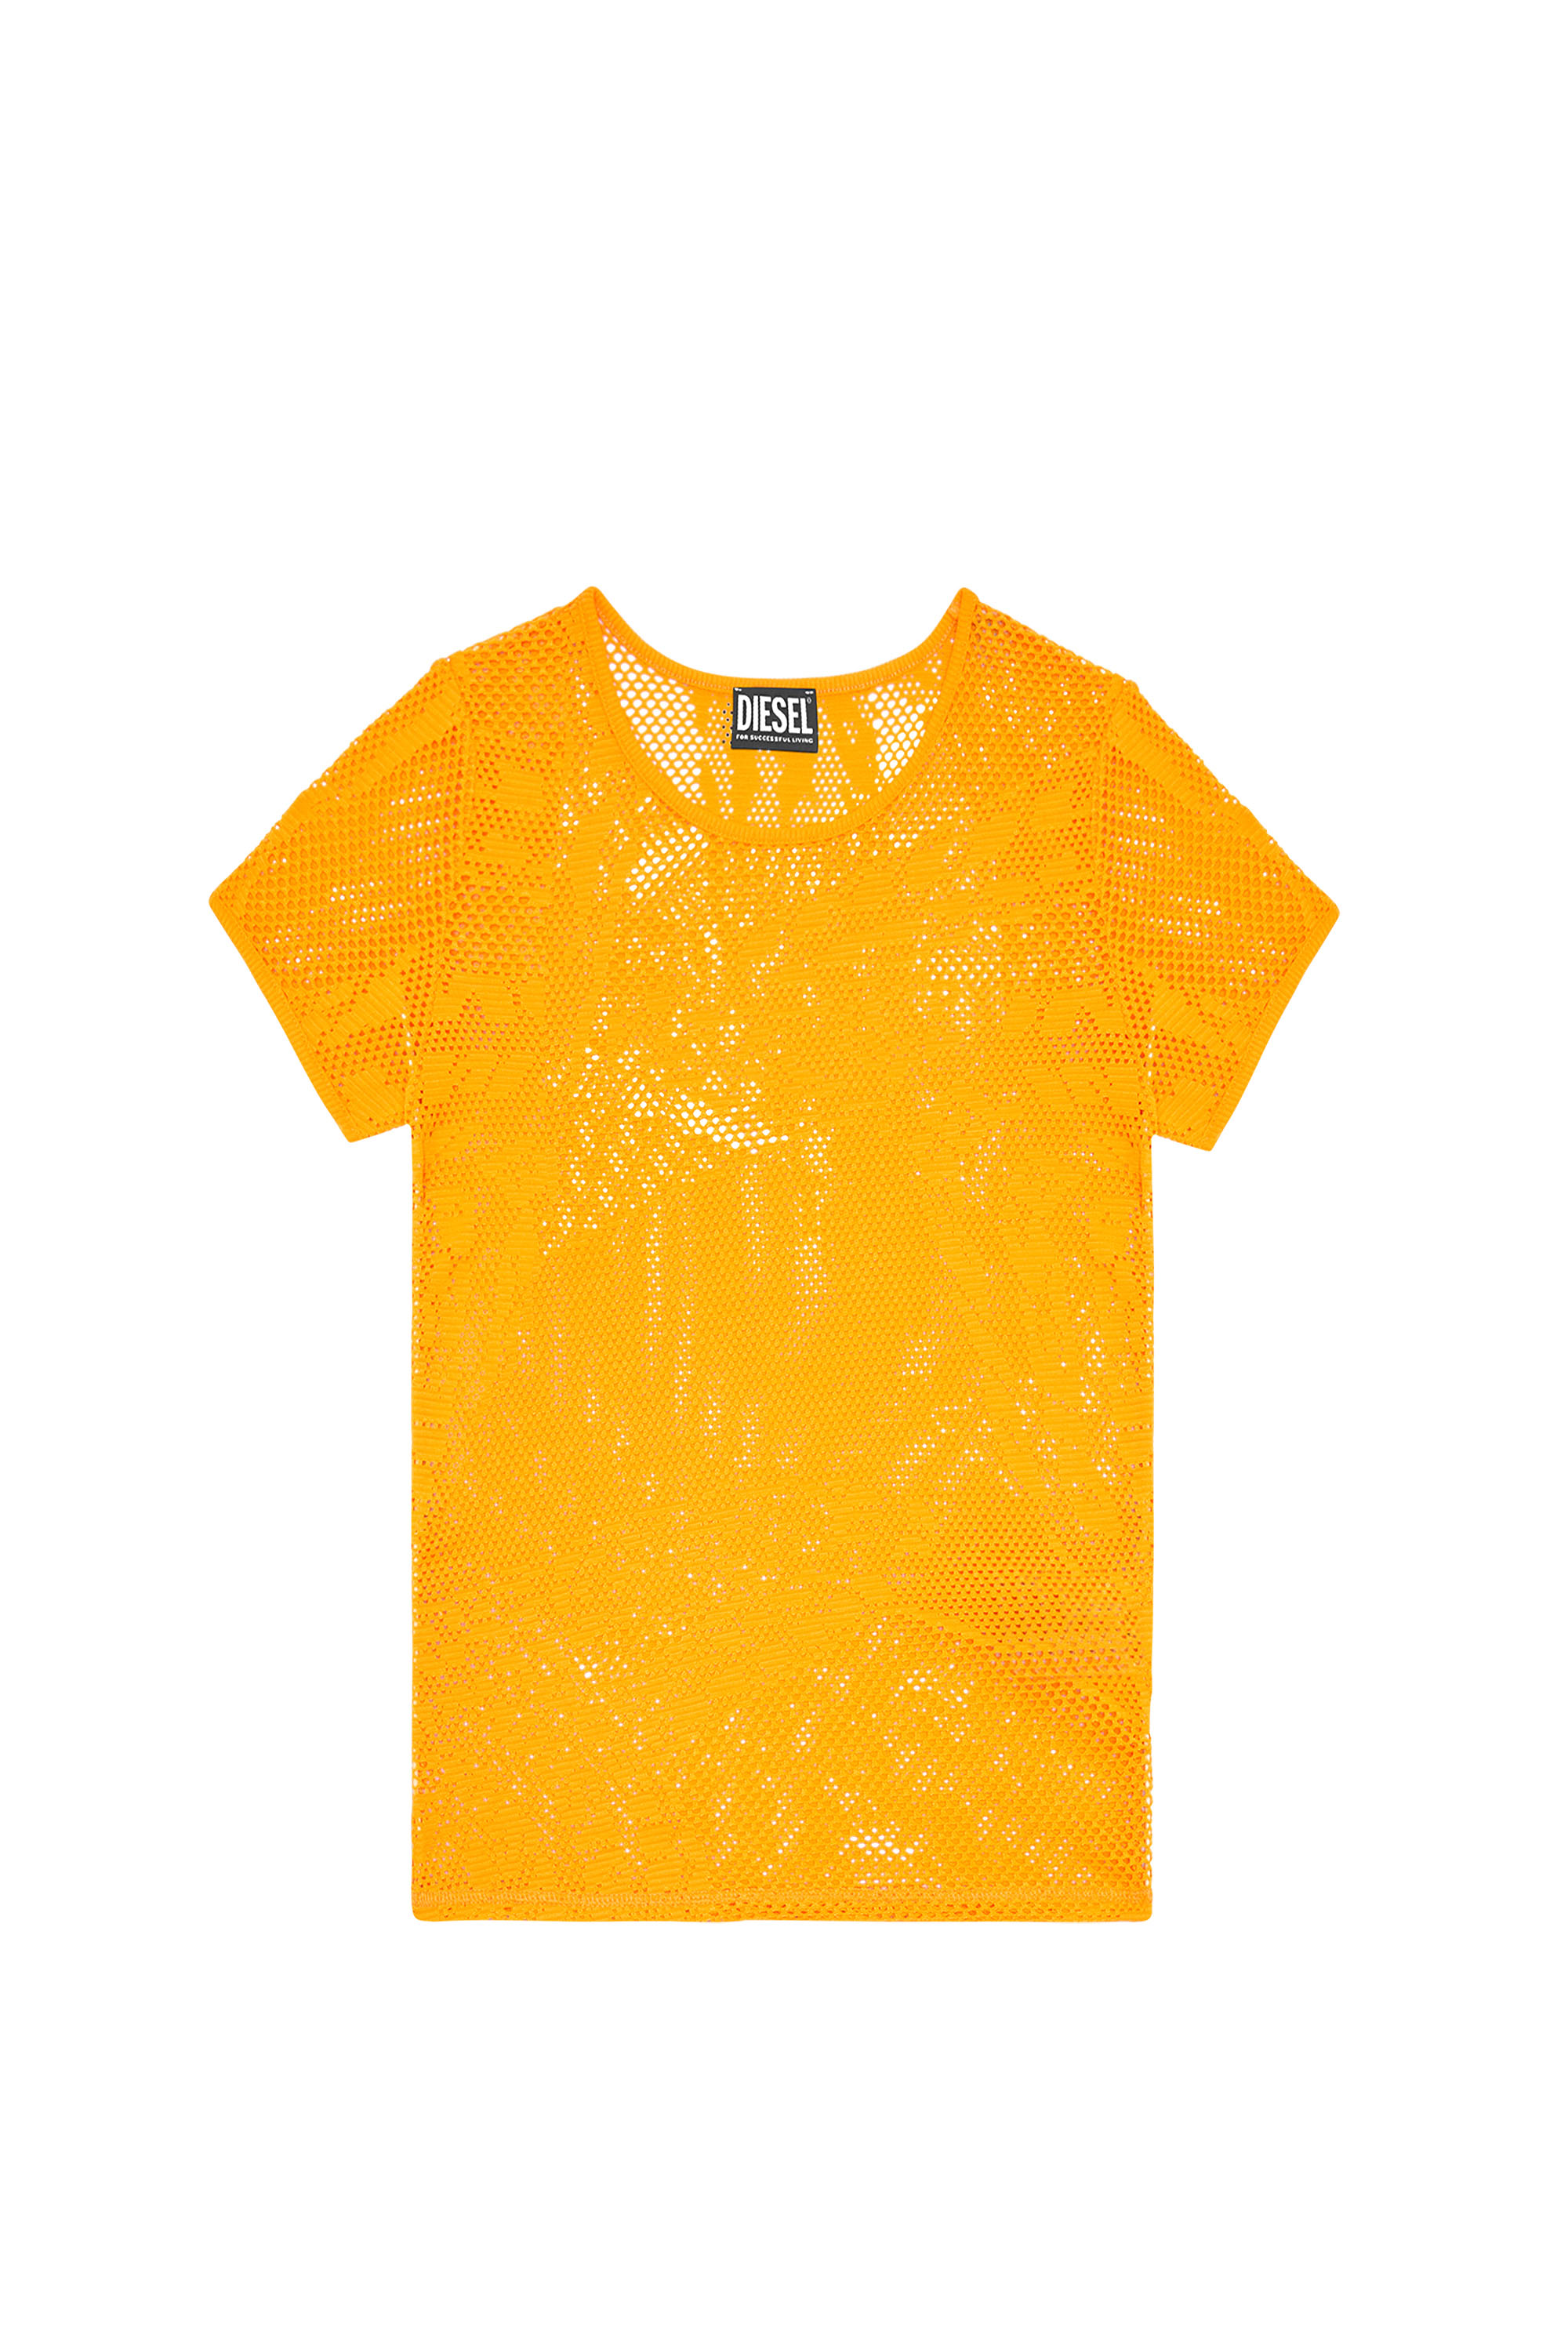 Diesel - T-JAQUE, Yellow - Image 3